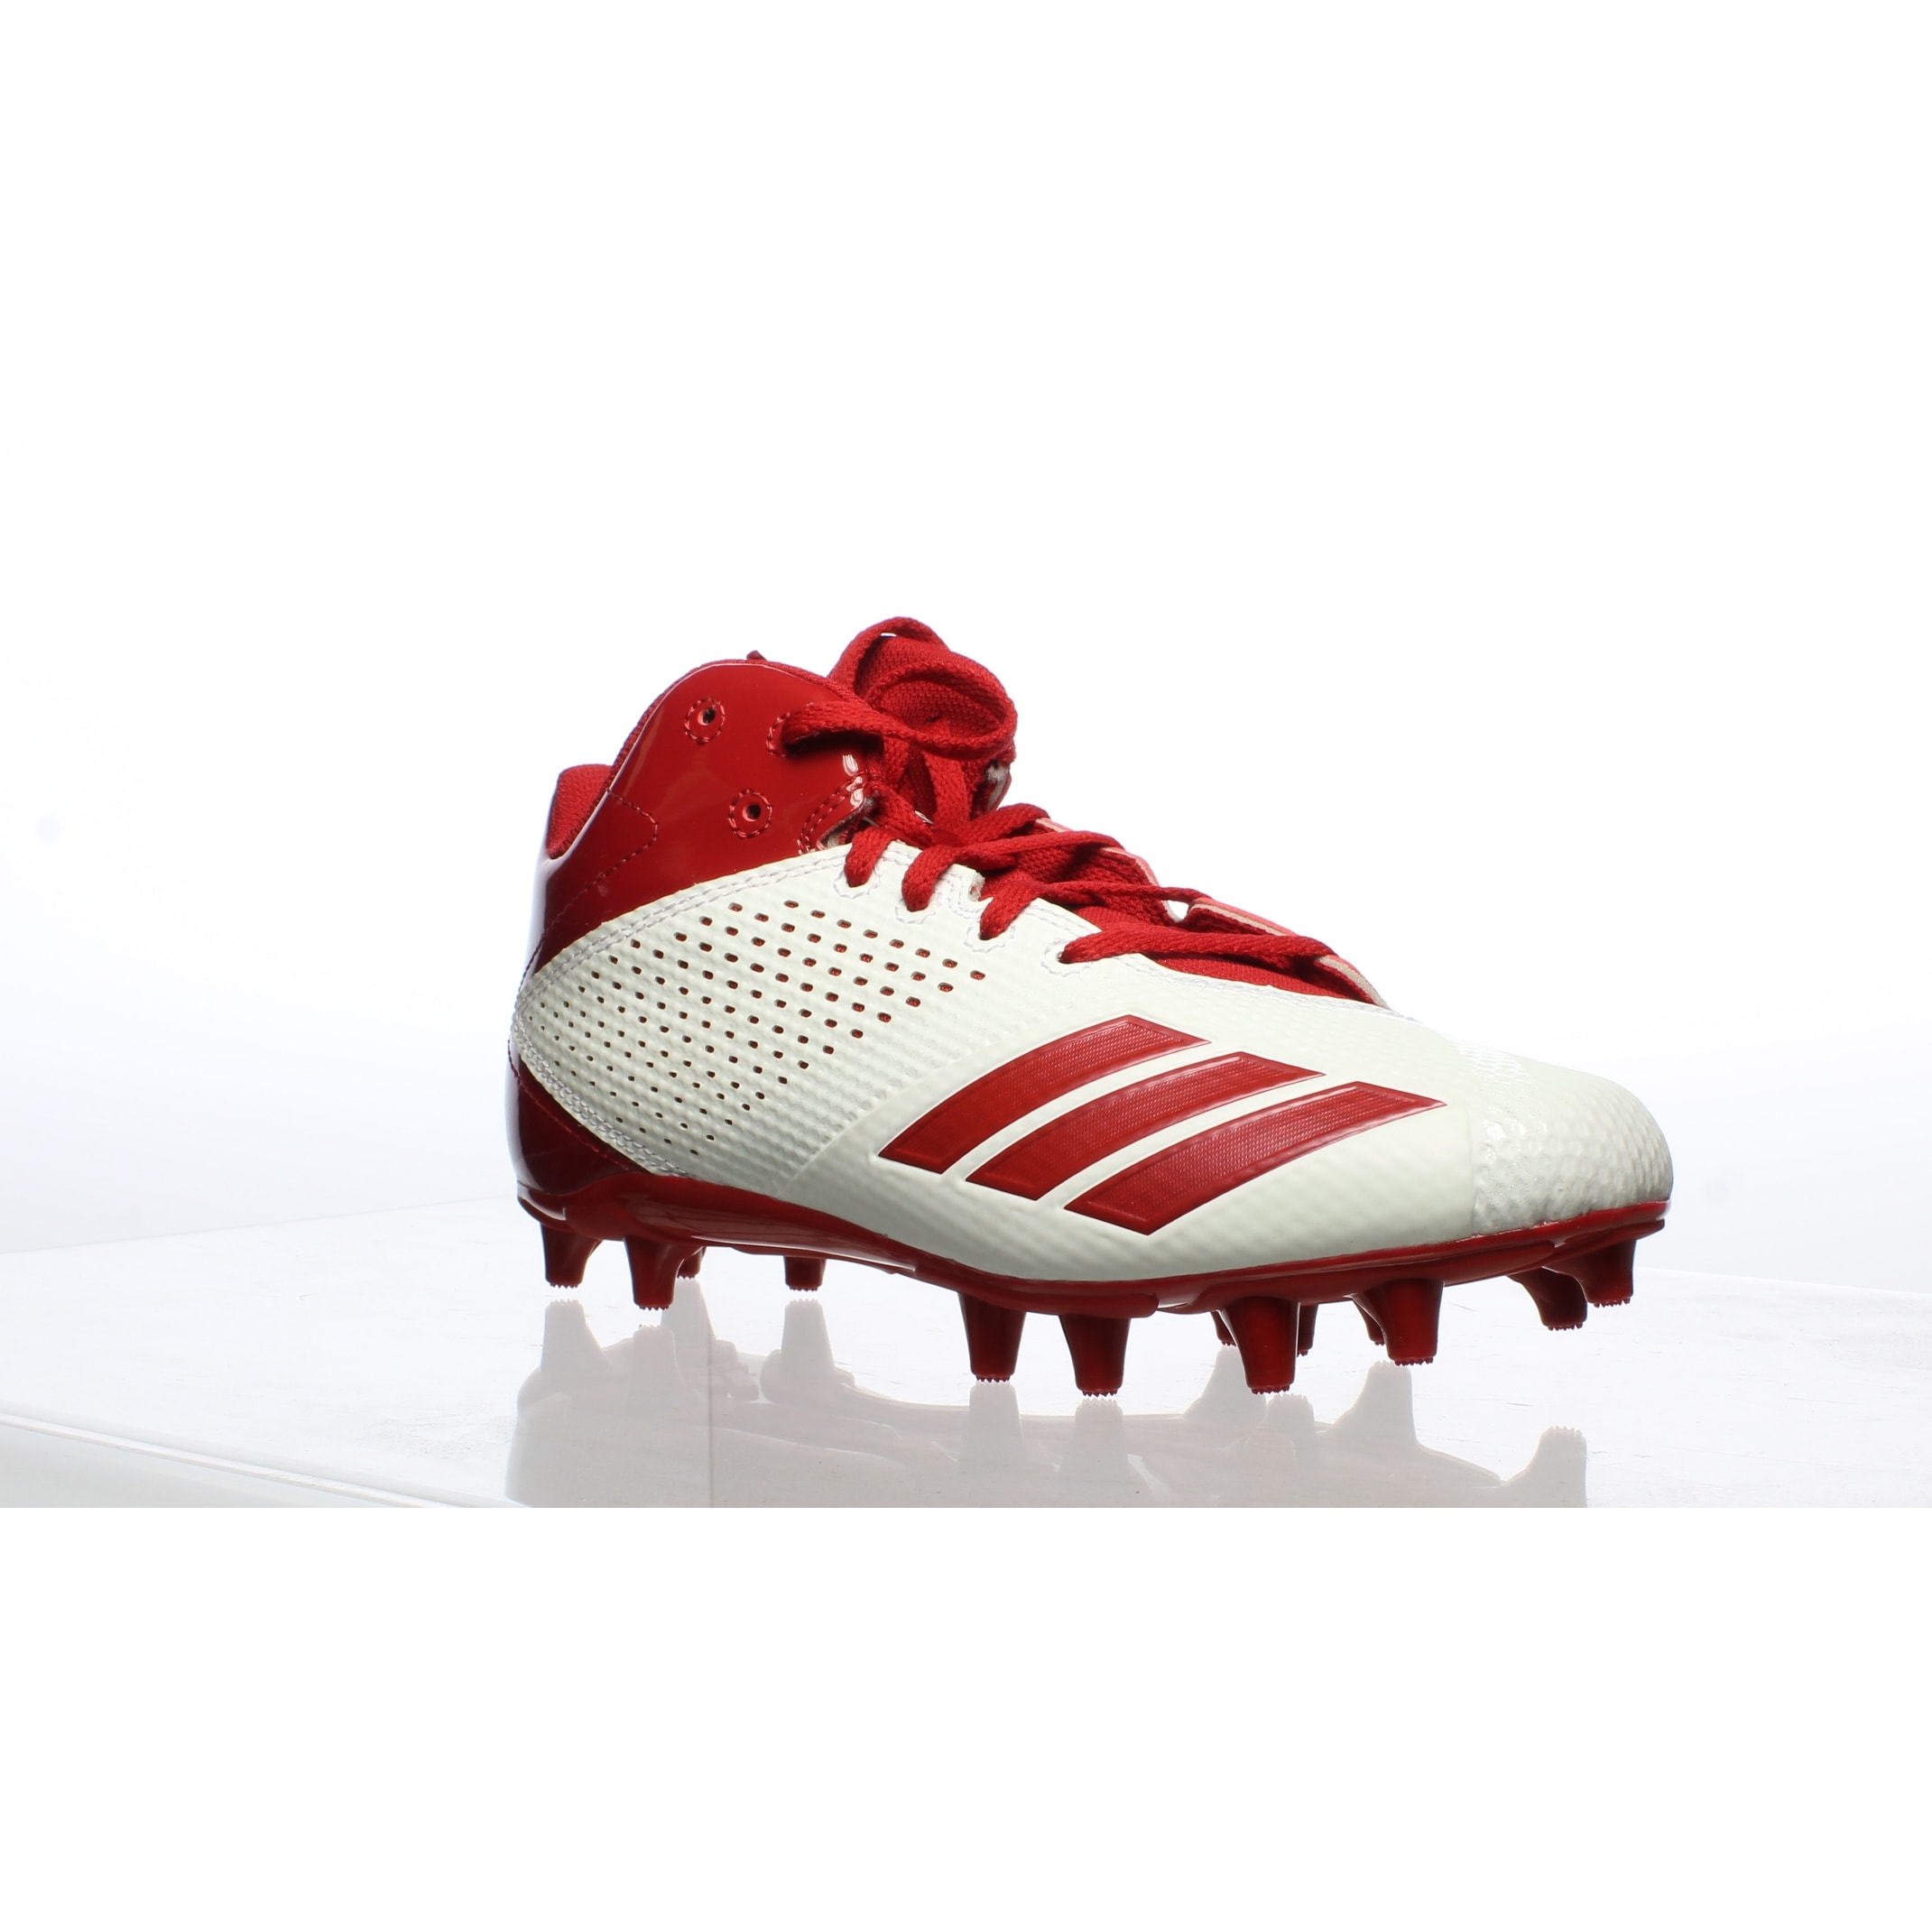 Star Mid Red Football Cleats Size 6.5 